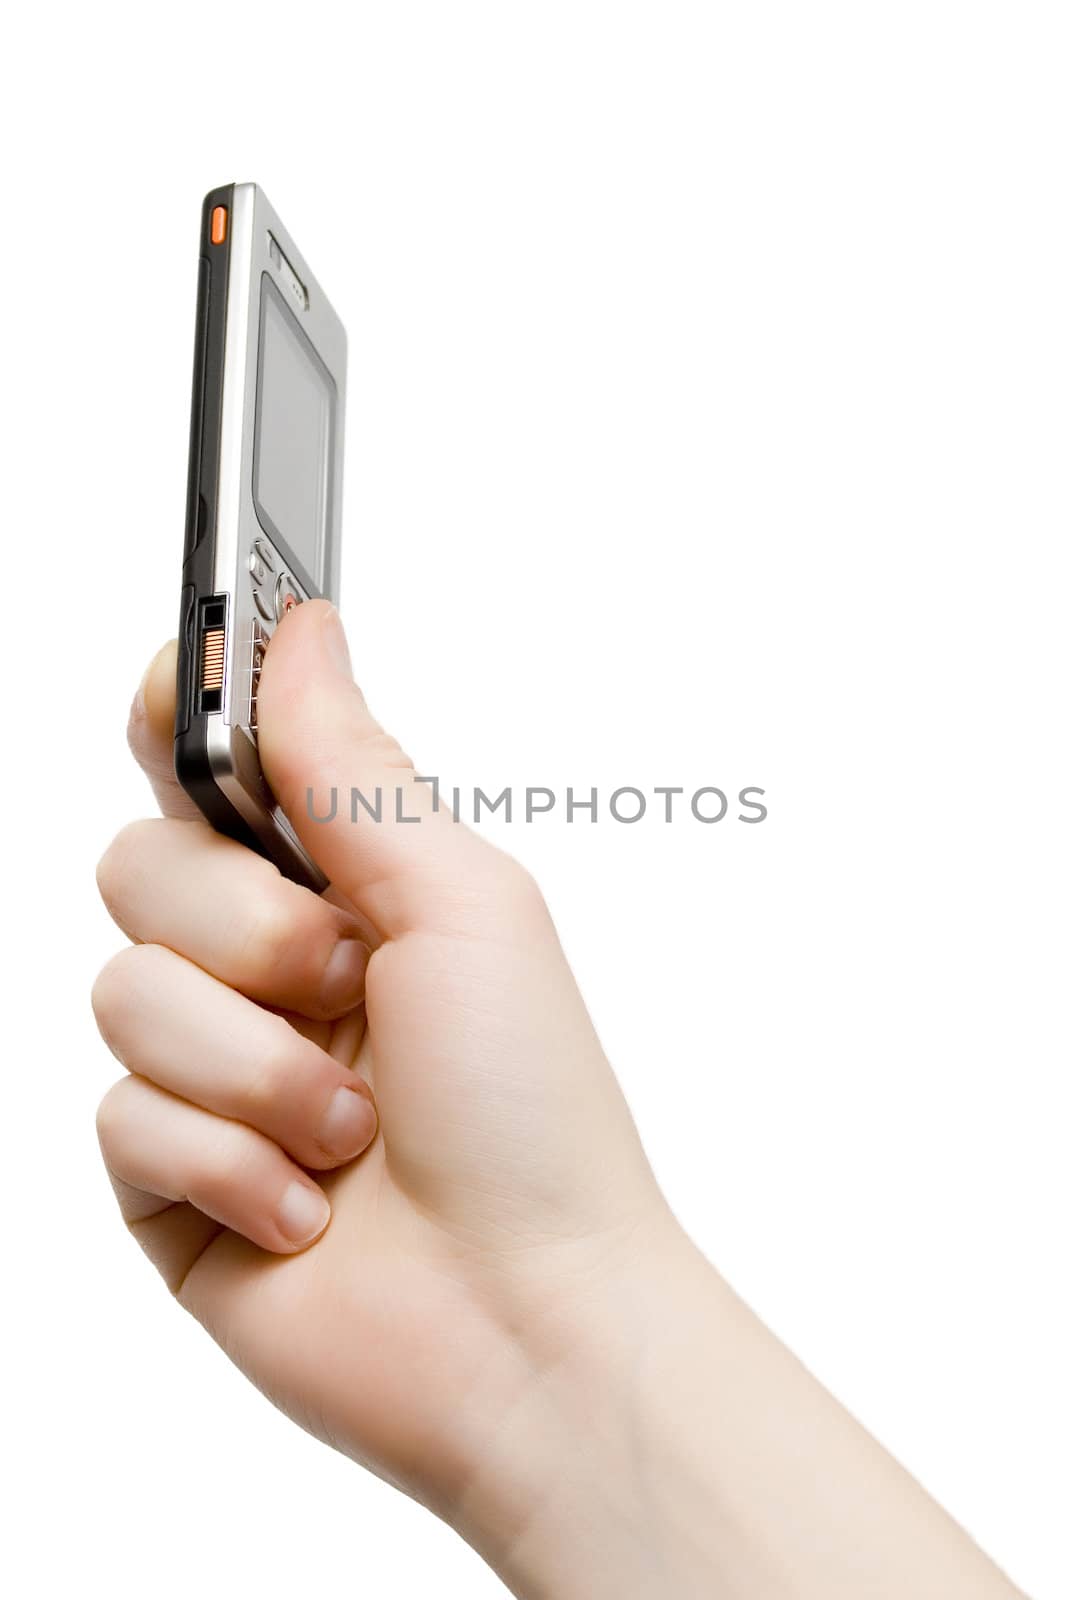 Slim mobile phone in the women's hand